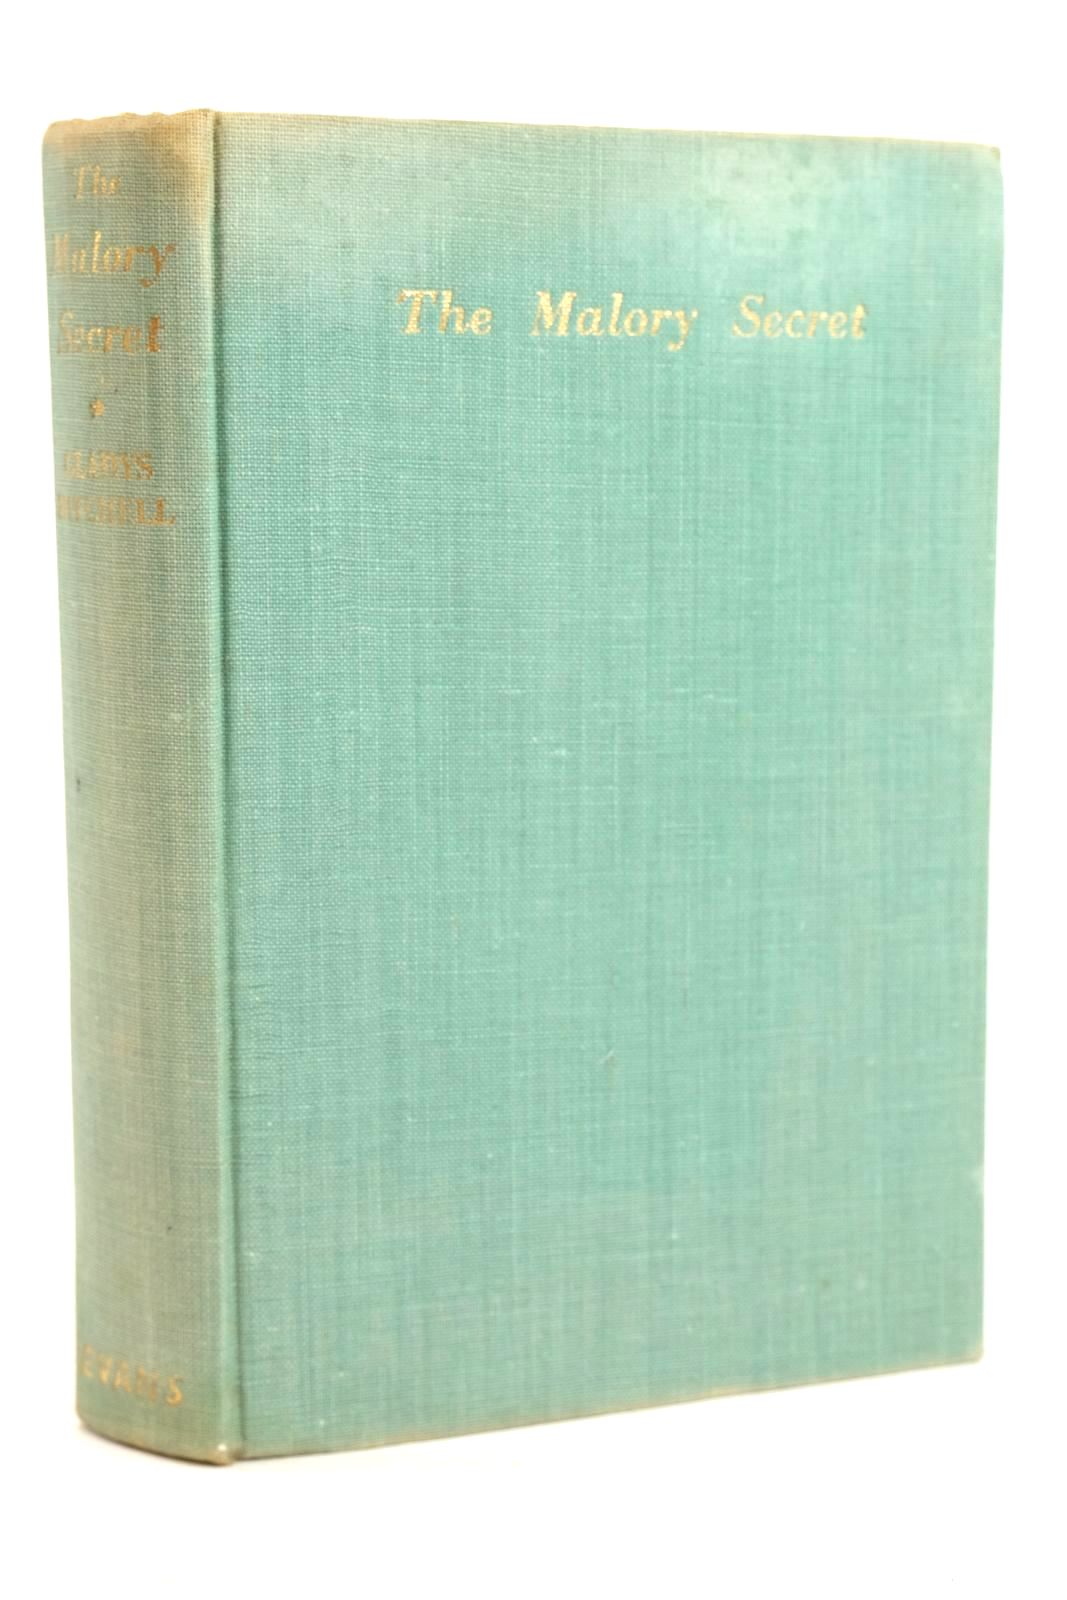 Photo of THE MALORY SECRET written by Mitchell, Gladys illustrated by Bush, Alice published by Evans Brothers Limited (STOCK CODE: 1320101)  for sale by Stella & Rose's Books